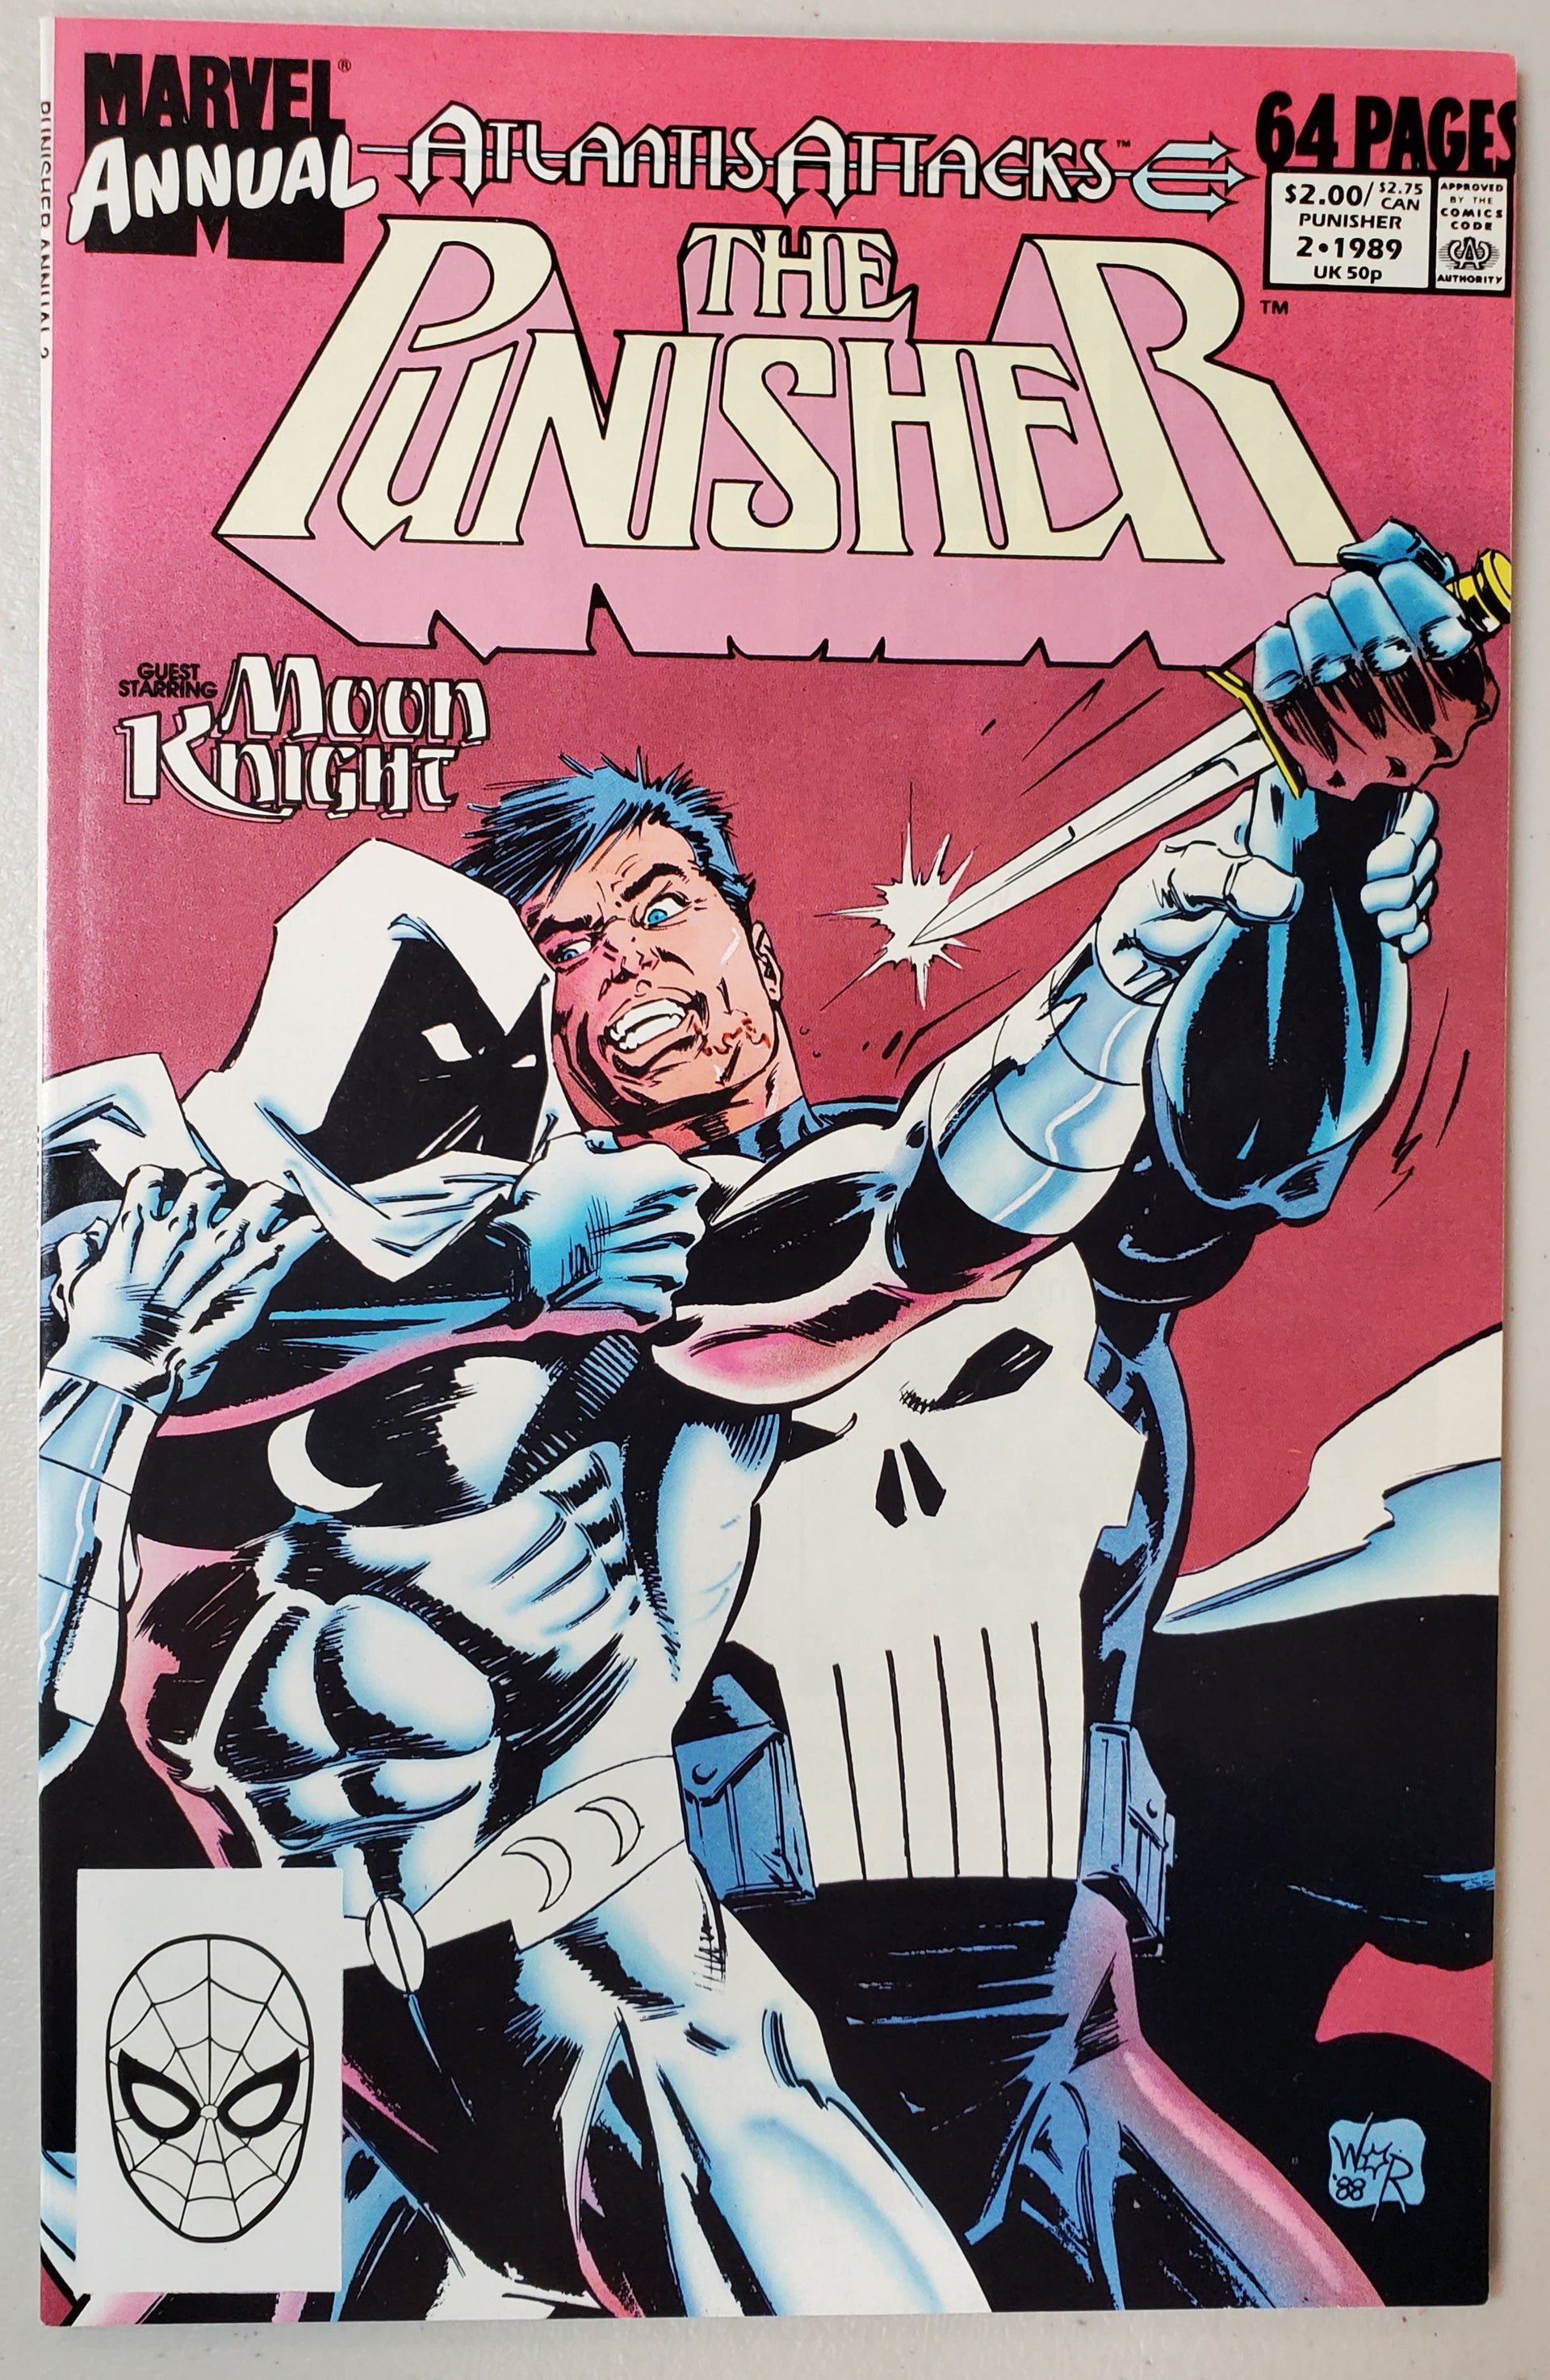 The Punisher HQ - The Punisher and Moon Knight. #punisher